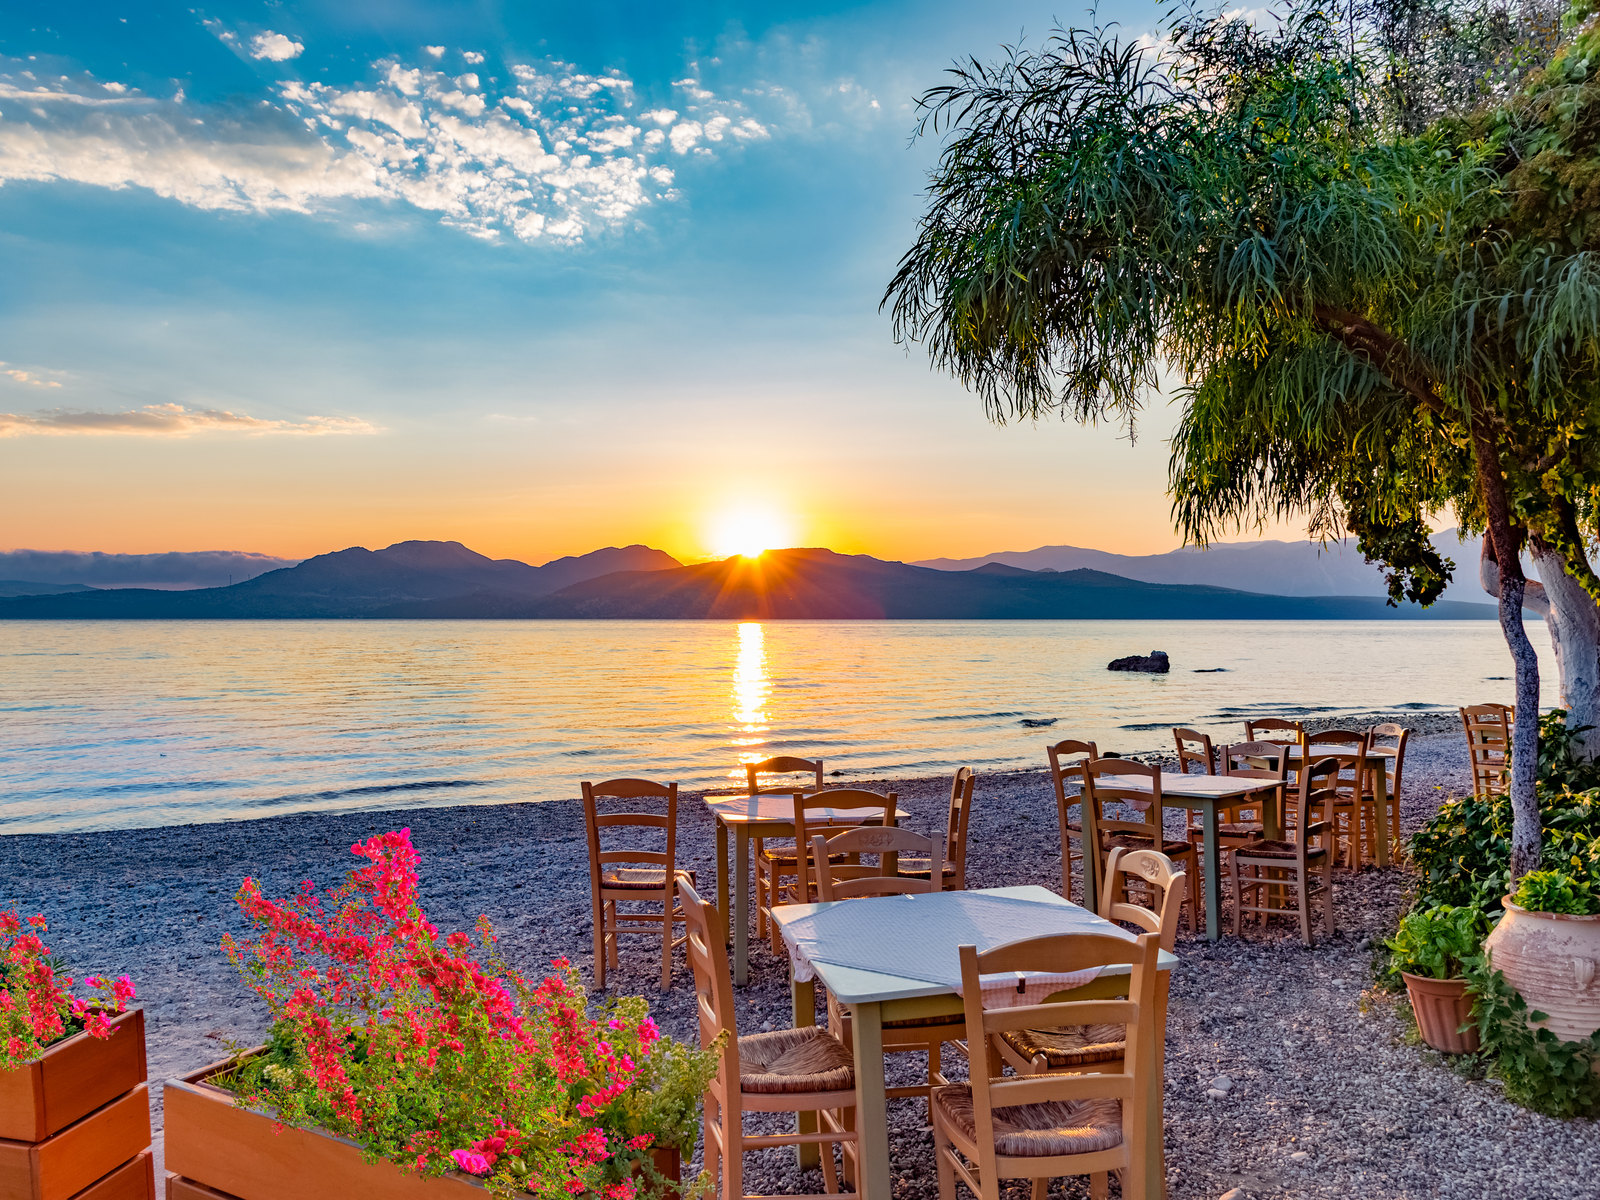 Romantic beach dining over a sunrise beside a calm sea at Lefkada Island, one of the best islands in Greece to visit